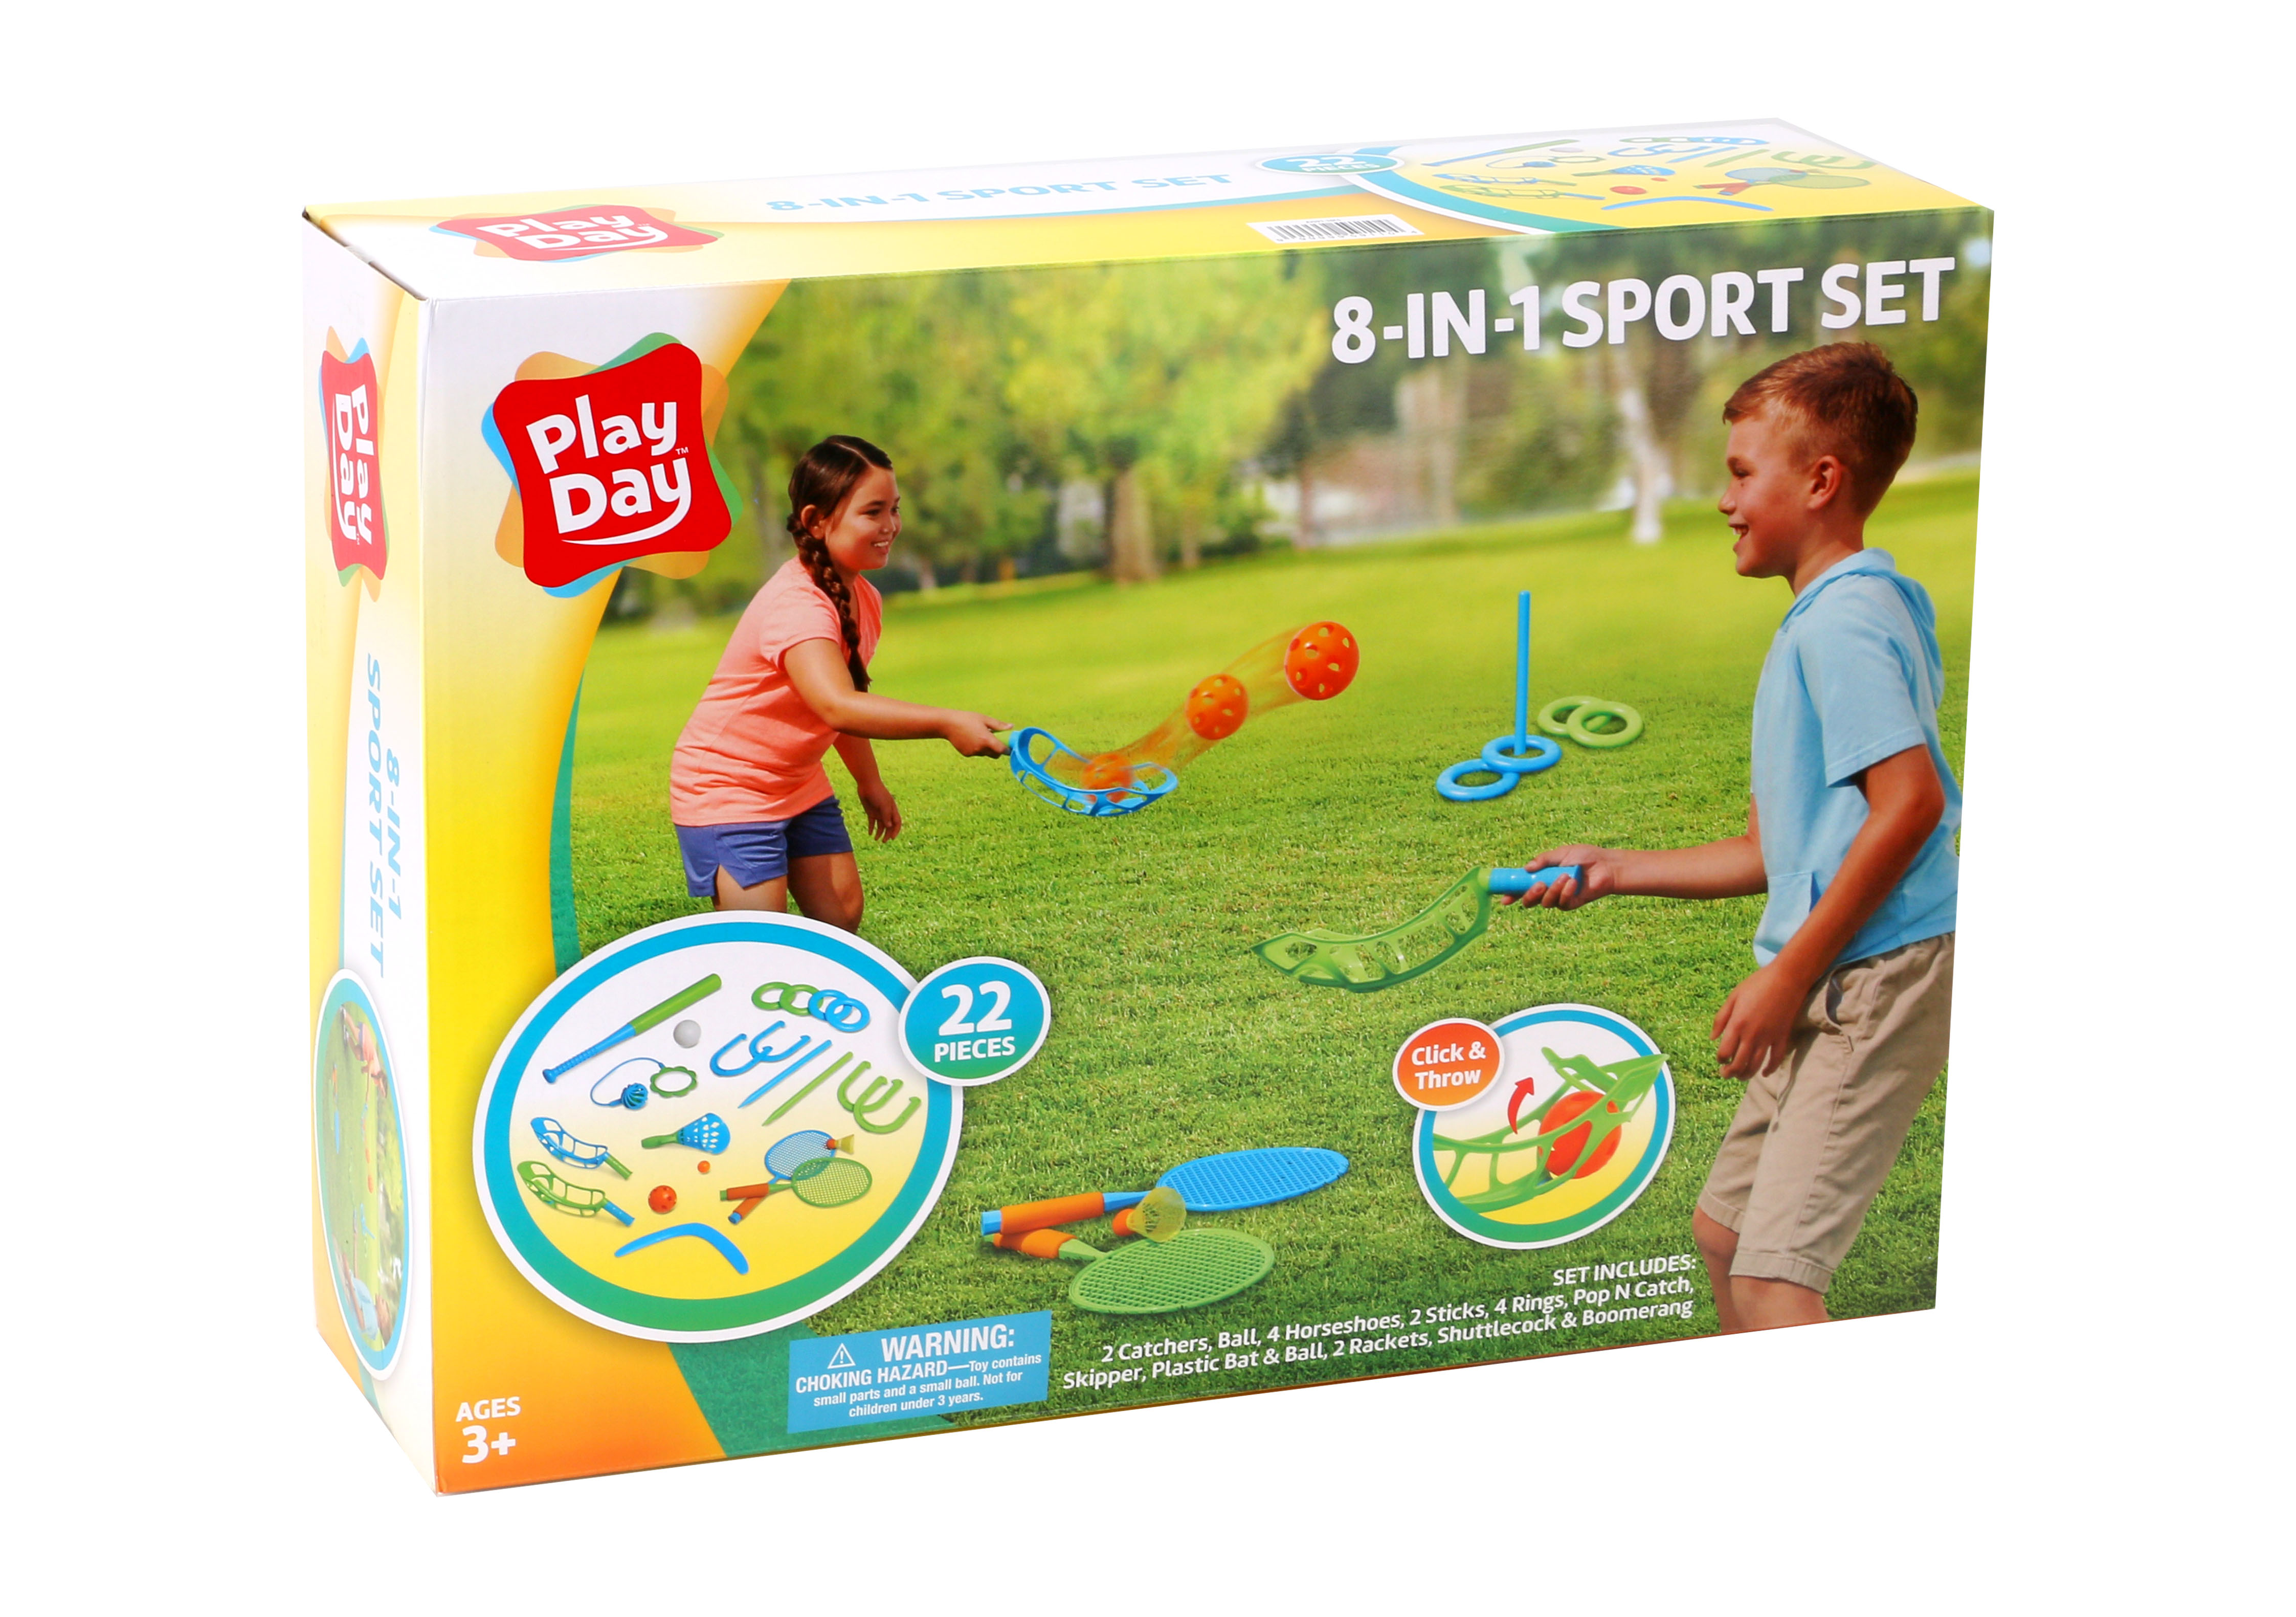 Play Day 8-in-1 Combo Lawn Game Sport Set, 22 Pieces, Children Ages 3+ - image 5 of 5